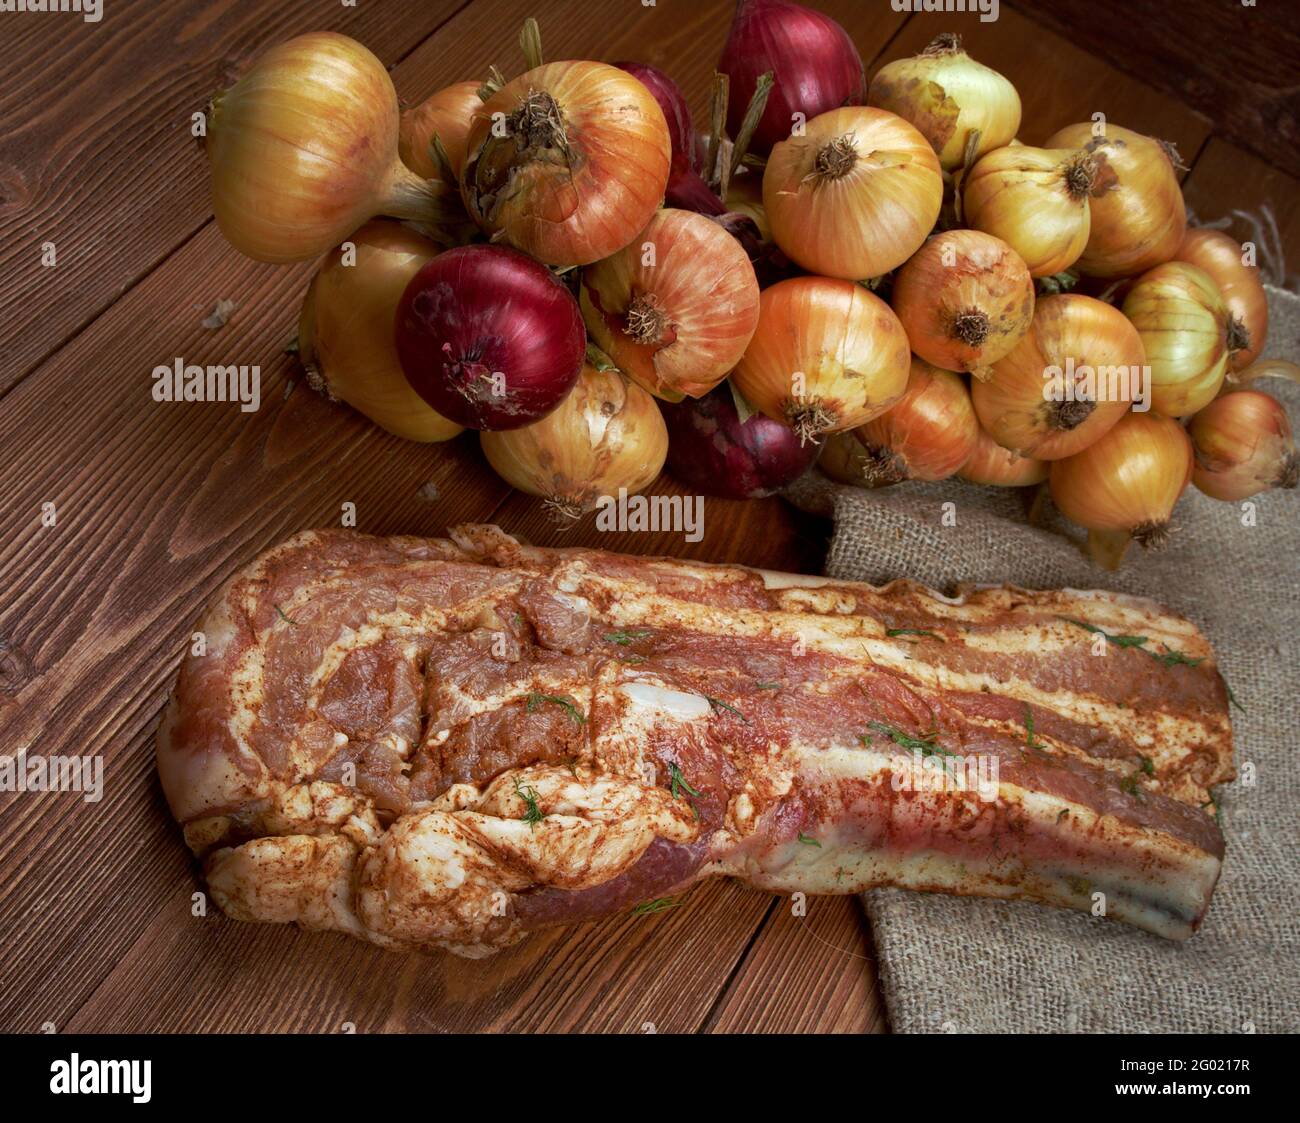 Reindeer Souvas -  traditional Swedish meat product, dry-salting reindeer meat, Stock Photo